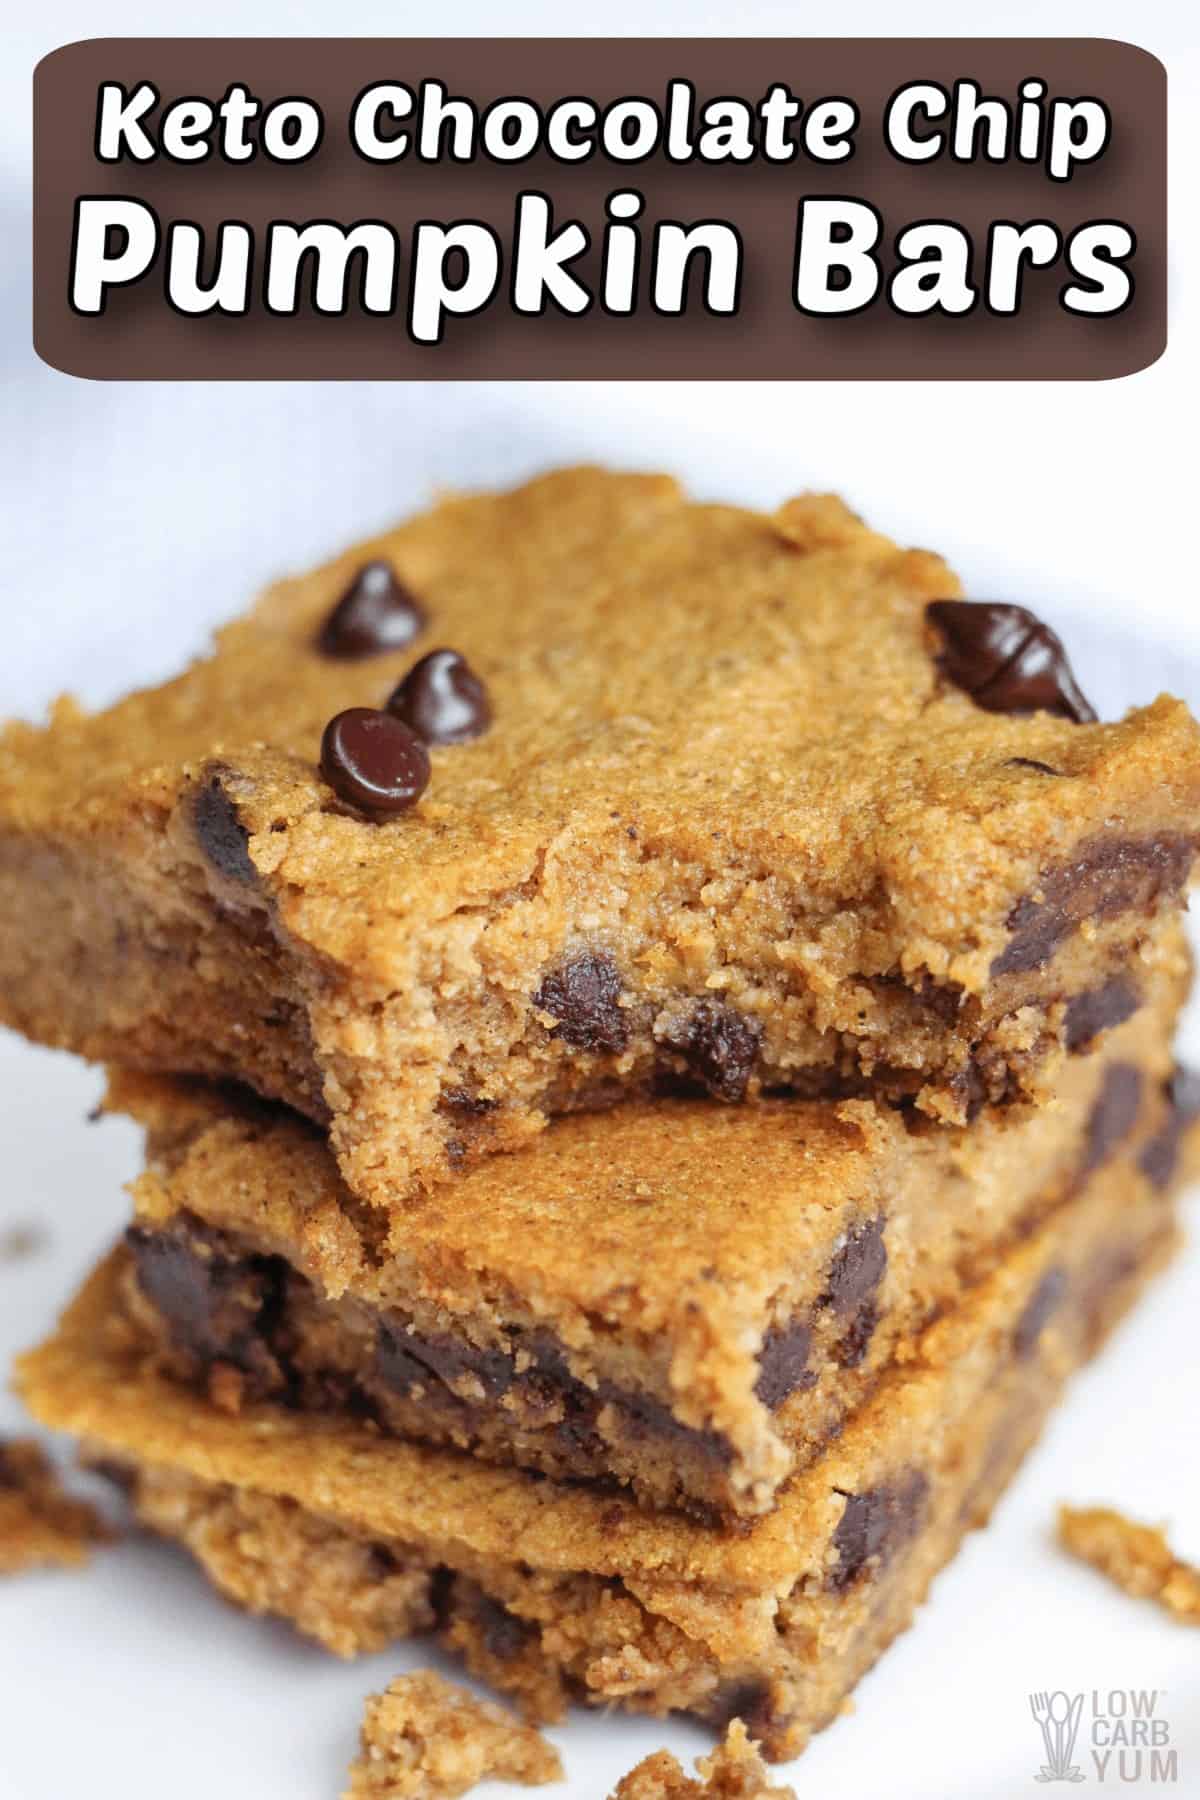 keto pumpkin bars with chocolate chips pintrest image